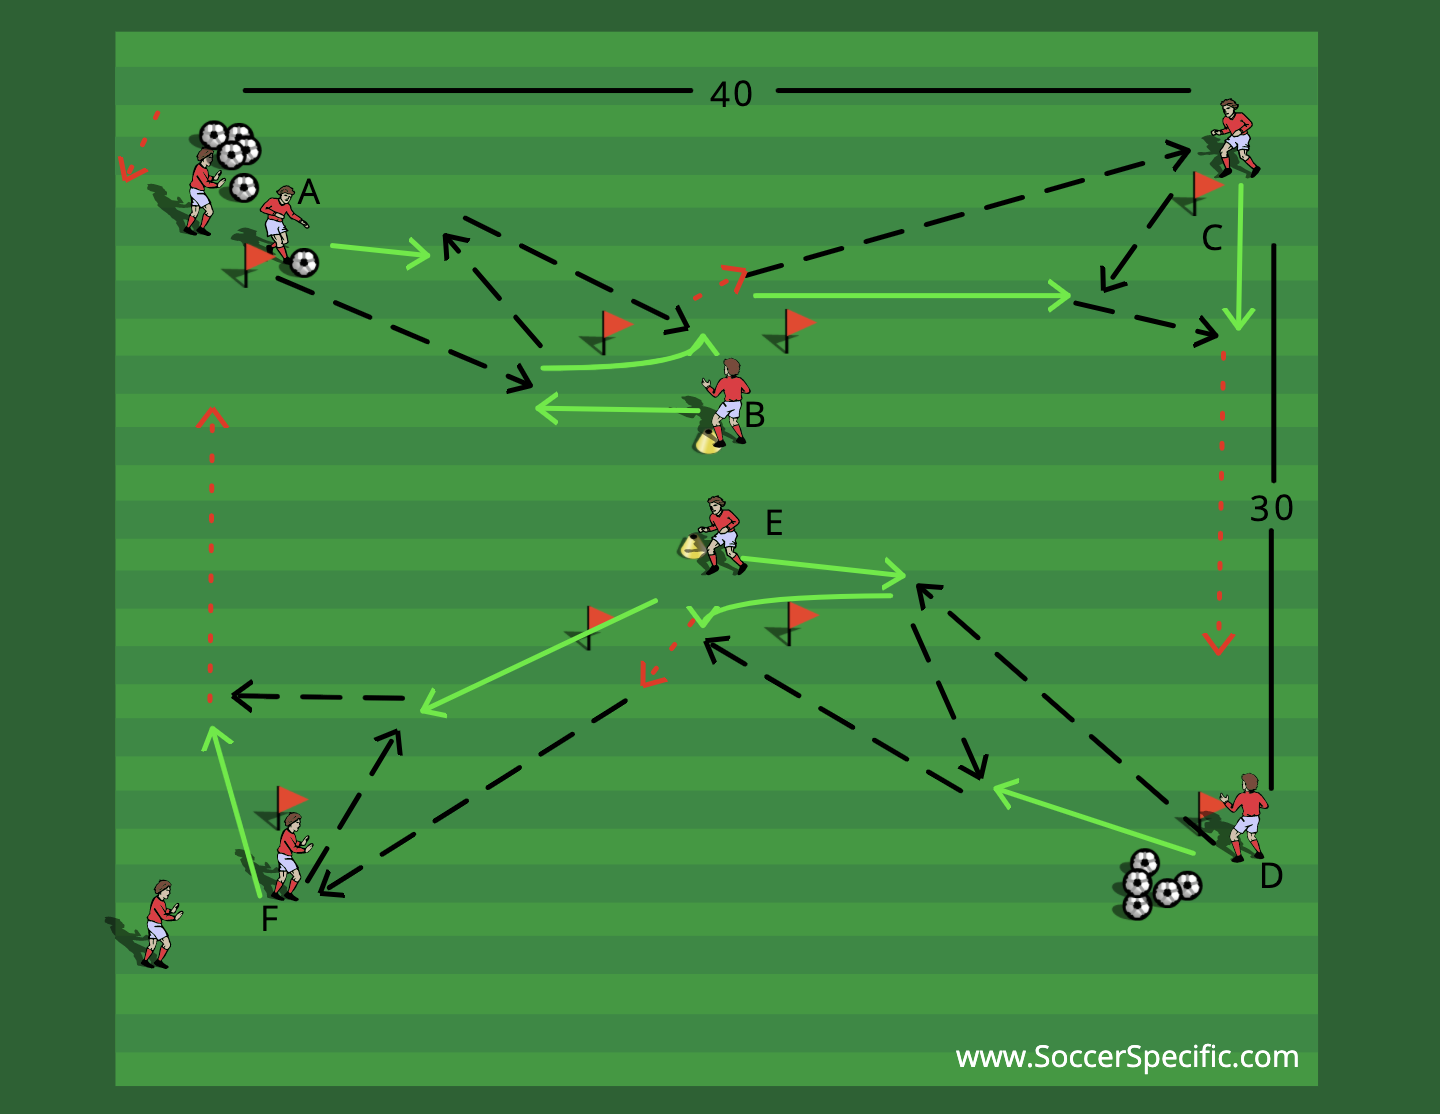 Switching Play 3 | SoccerSpecific.com